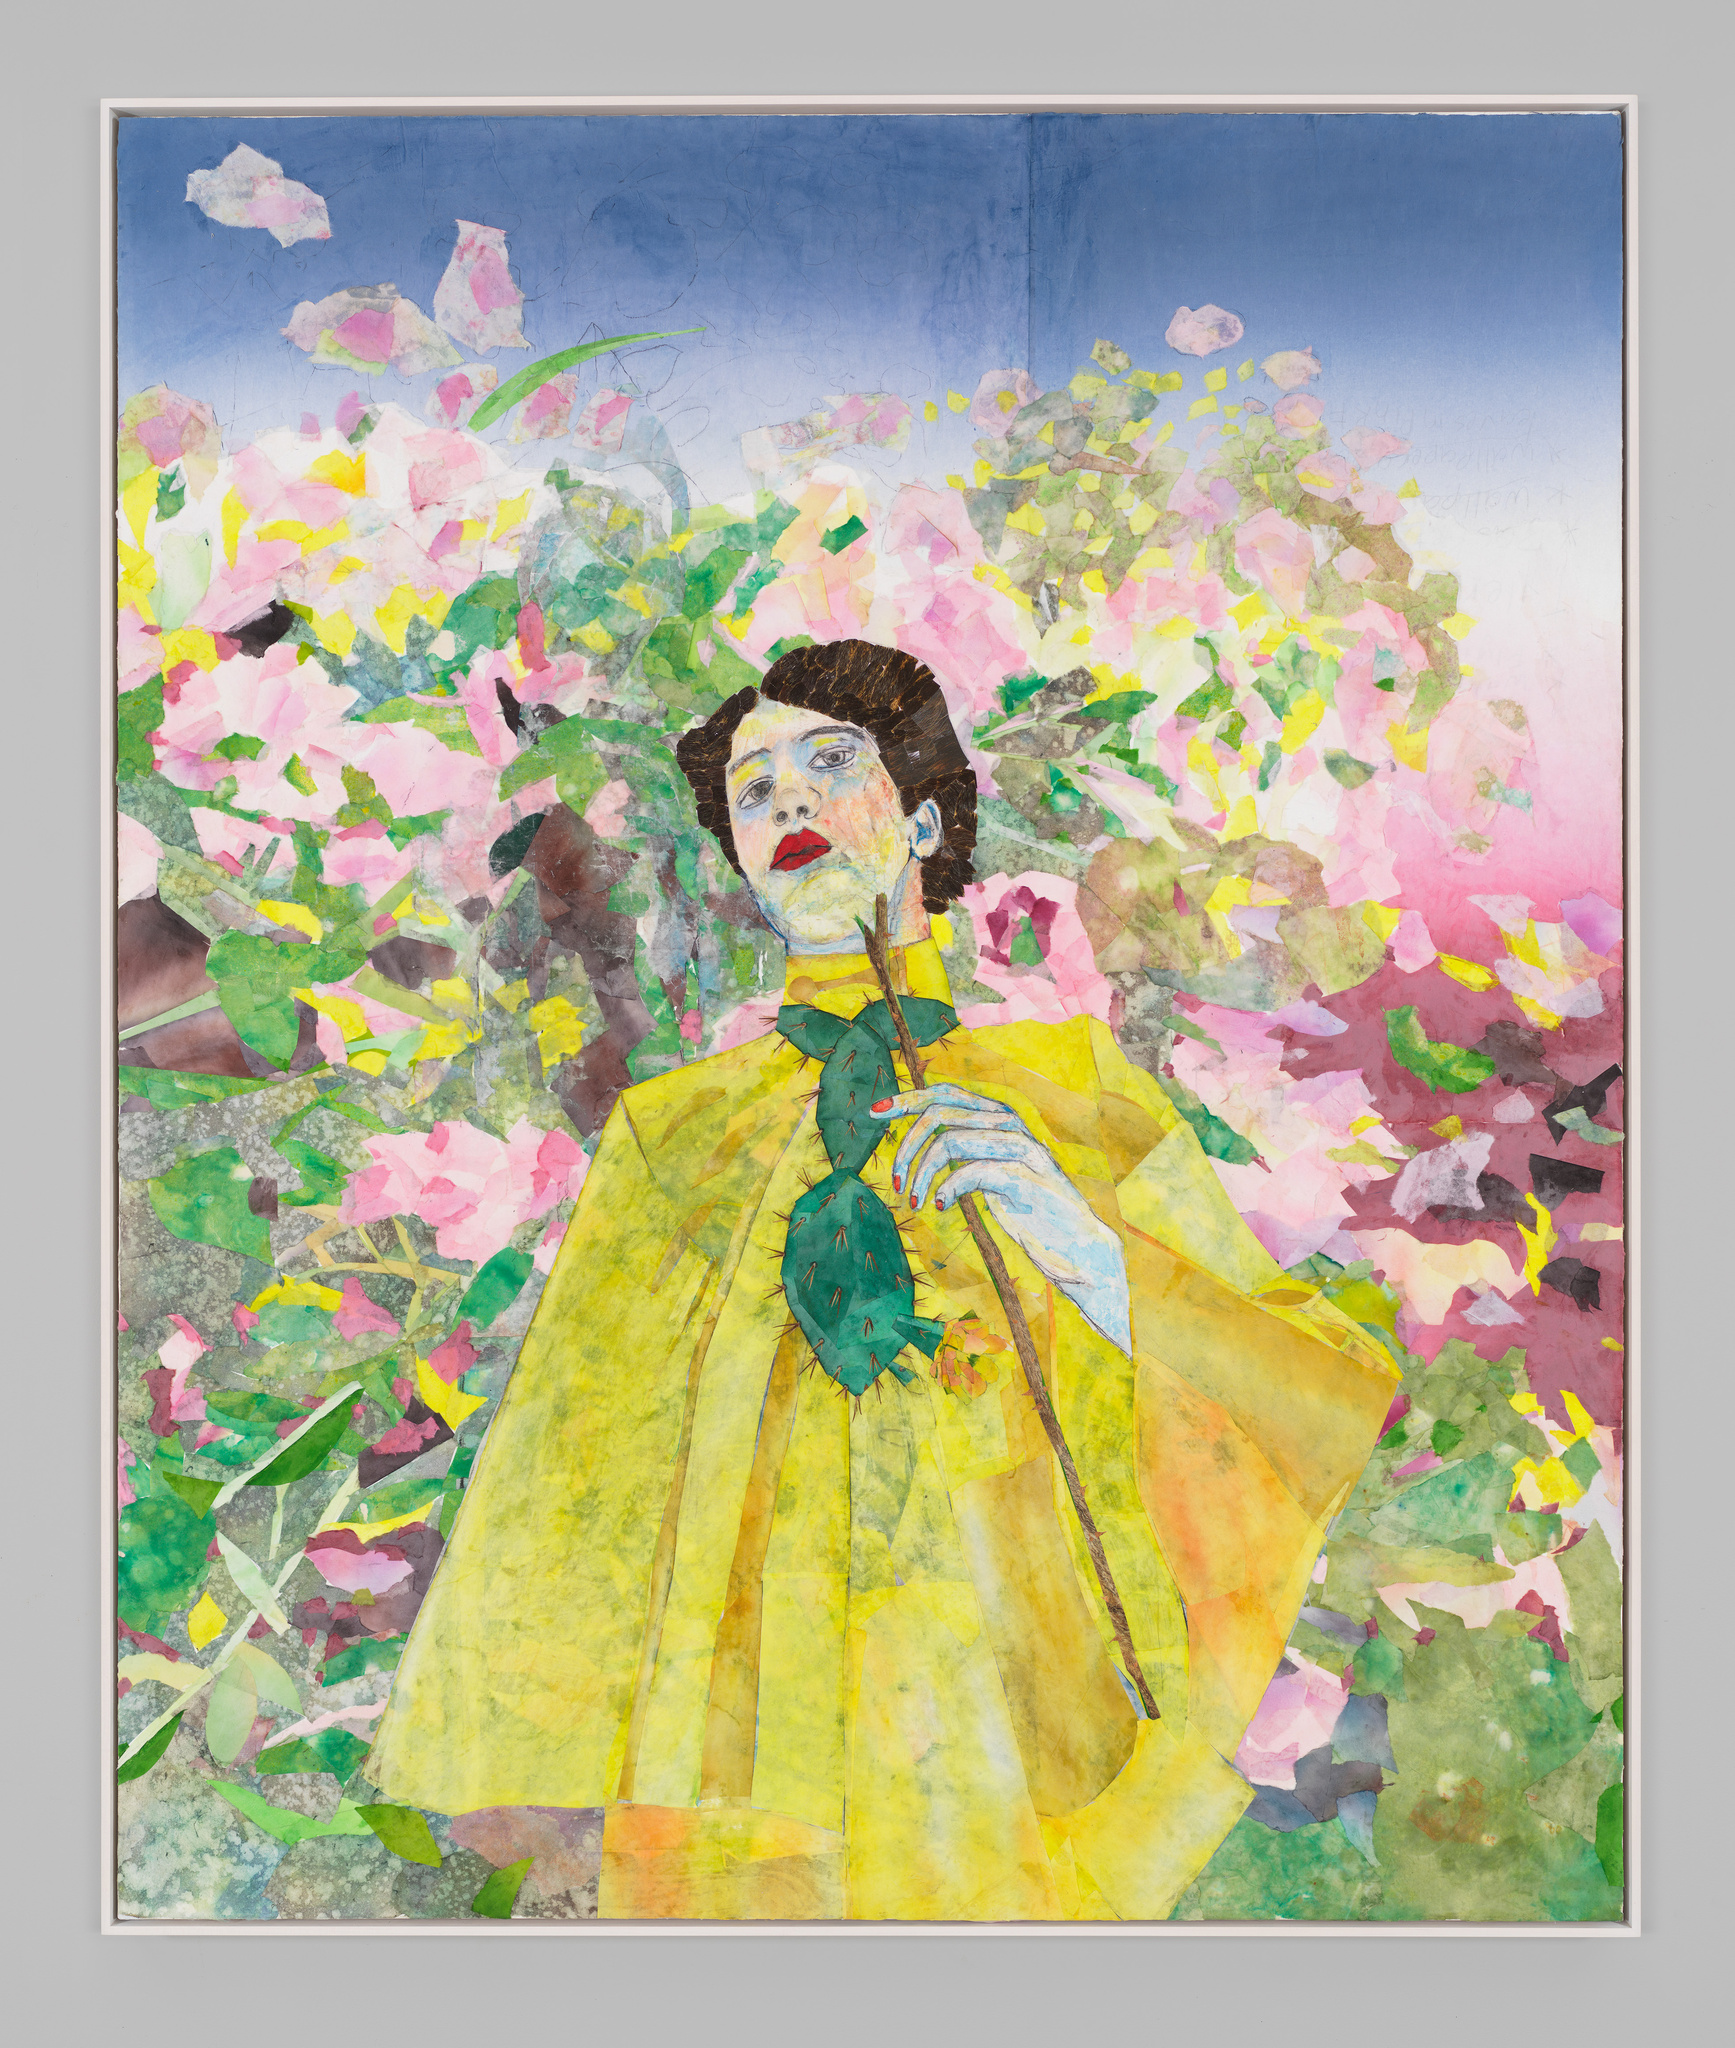 A figure with pale skin in a bright yellow blouse surrounded by flurries of pinks, greens, and yellows